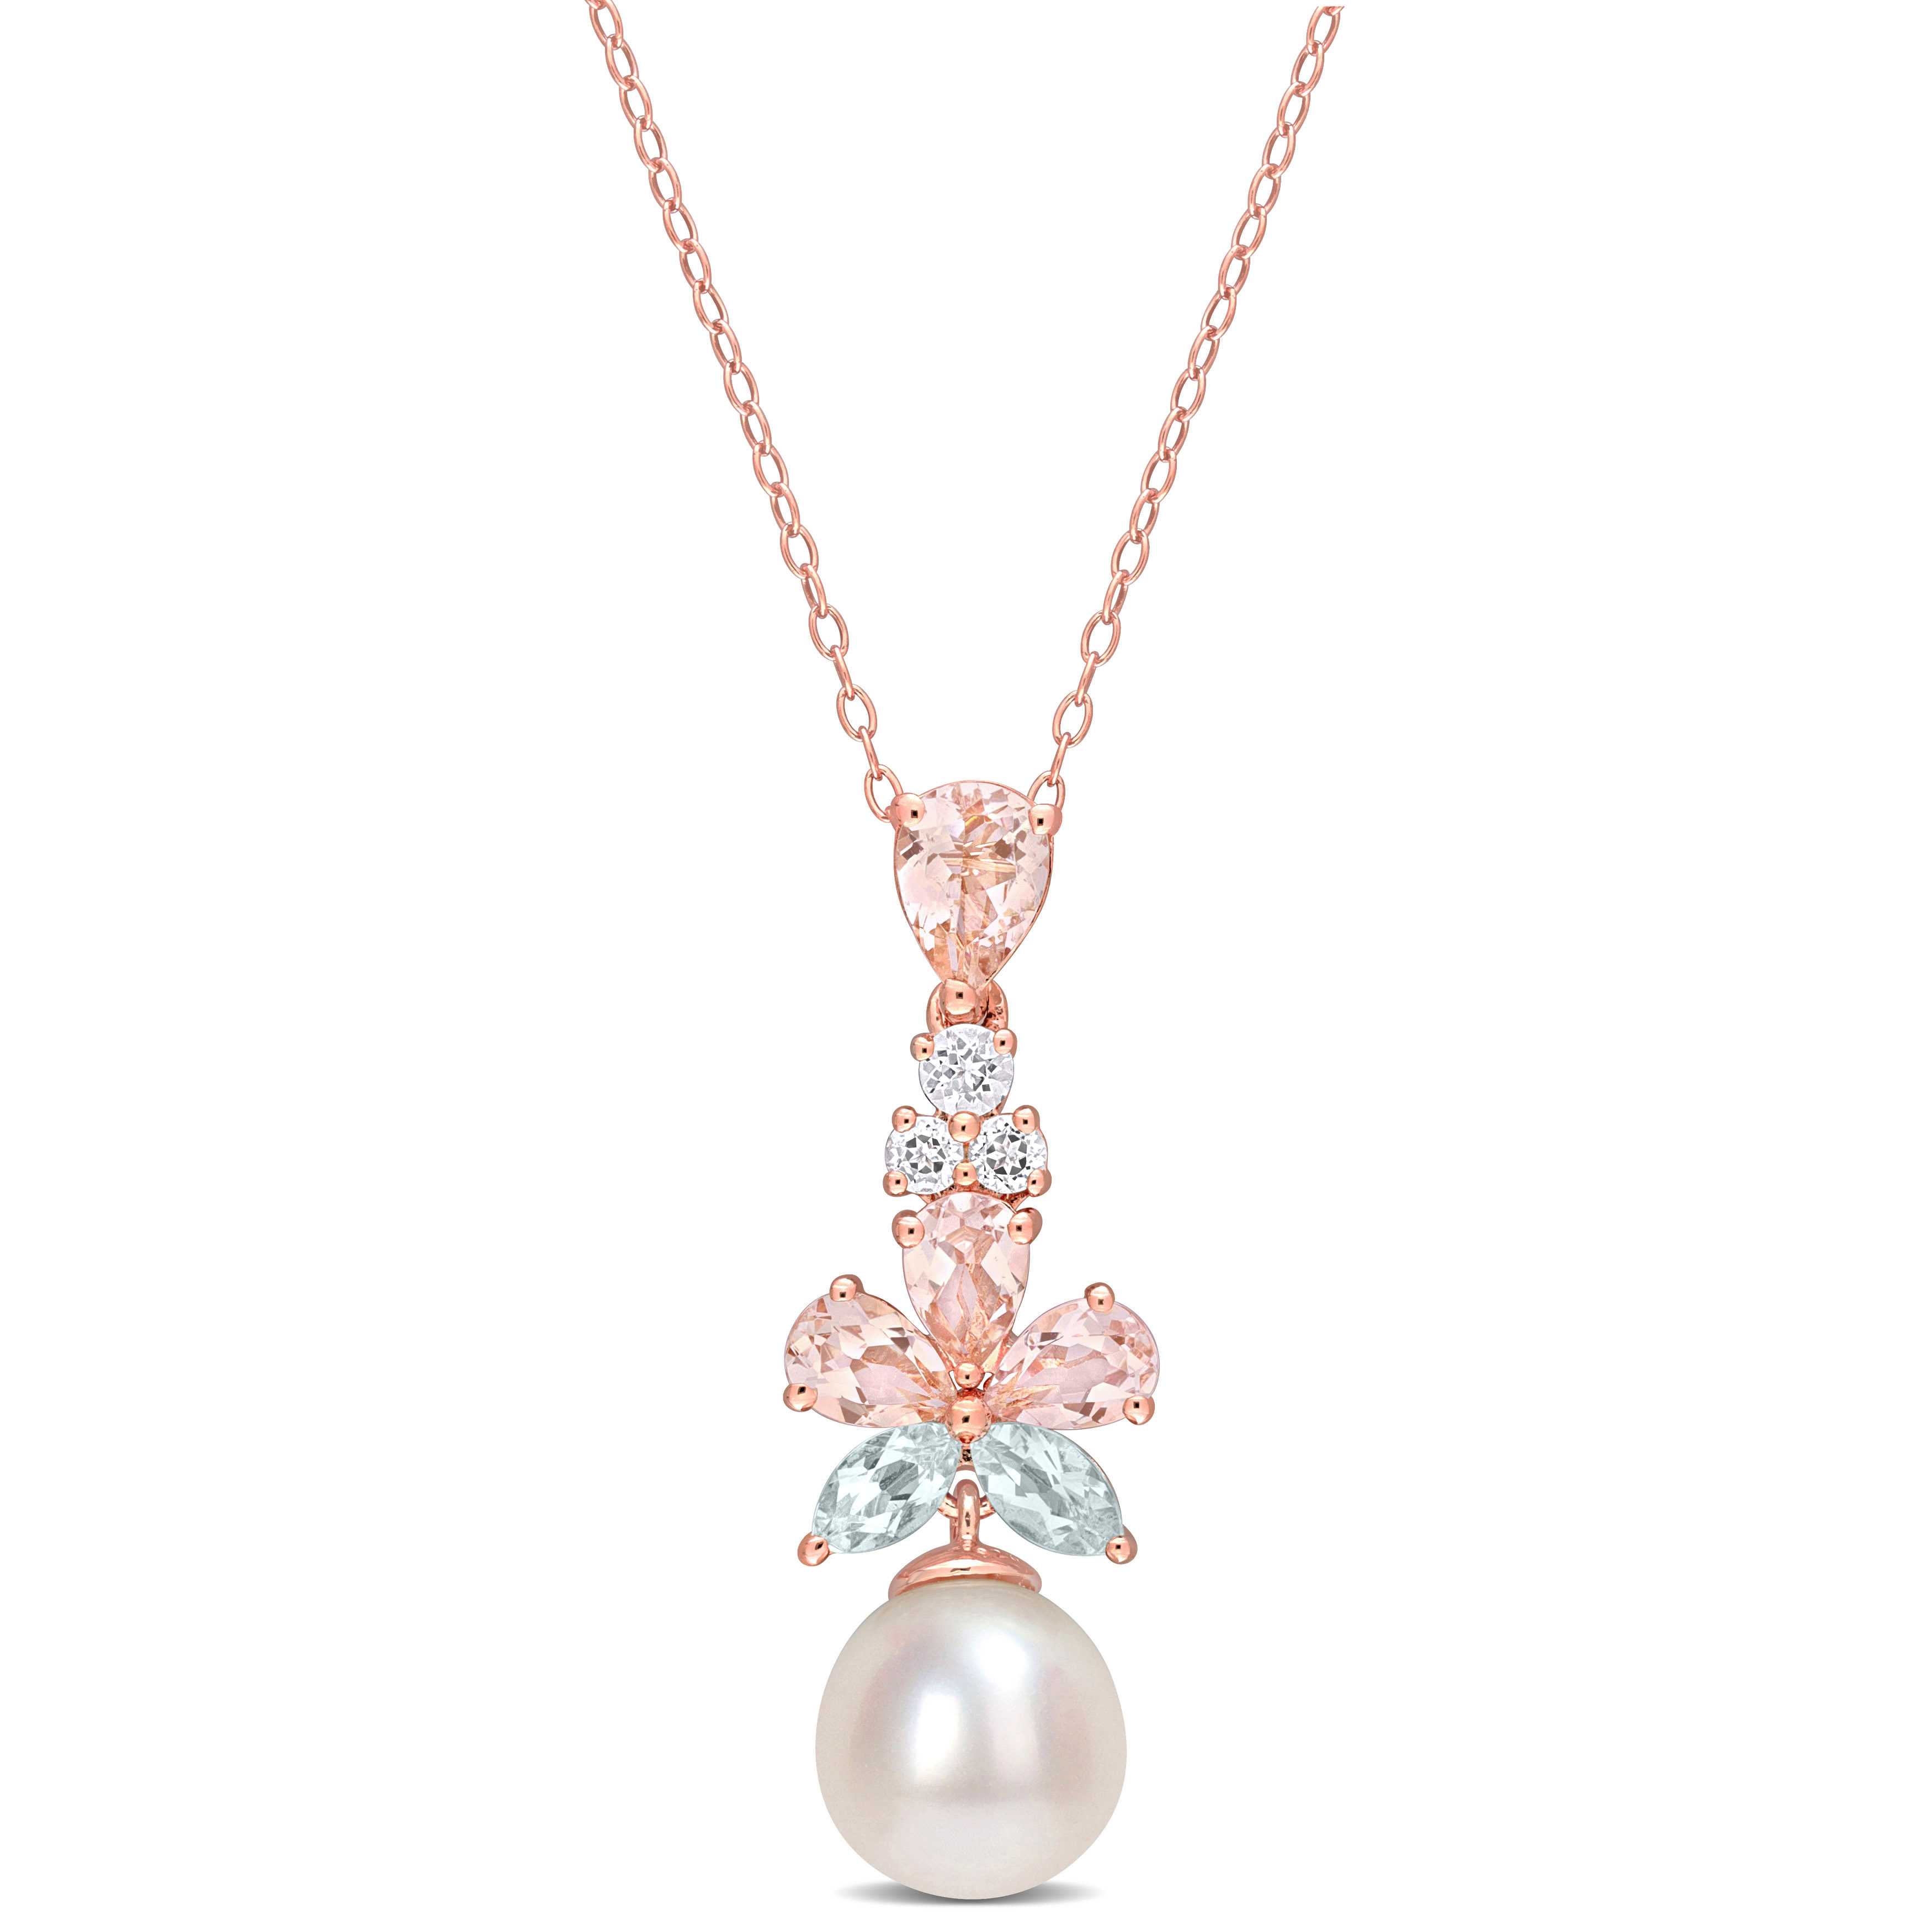 9.5-10 MM Freshwater Cultured Pearl and 2 3/4 CT TGW Morganite White Topaz & Aquamarine Floral Drop Pendant in 18k Rose Gold Plated Sterling Silver - 18 in.